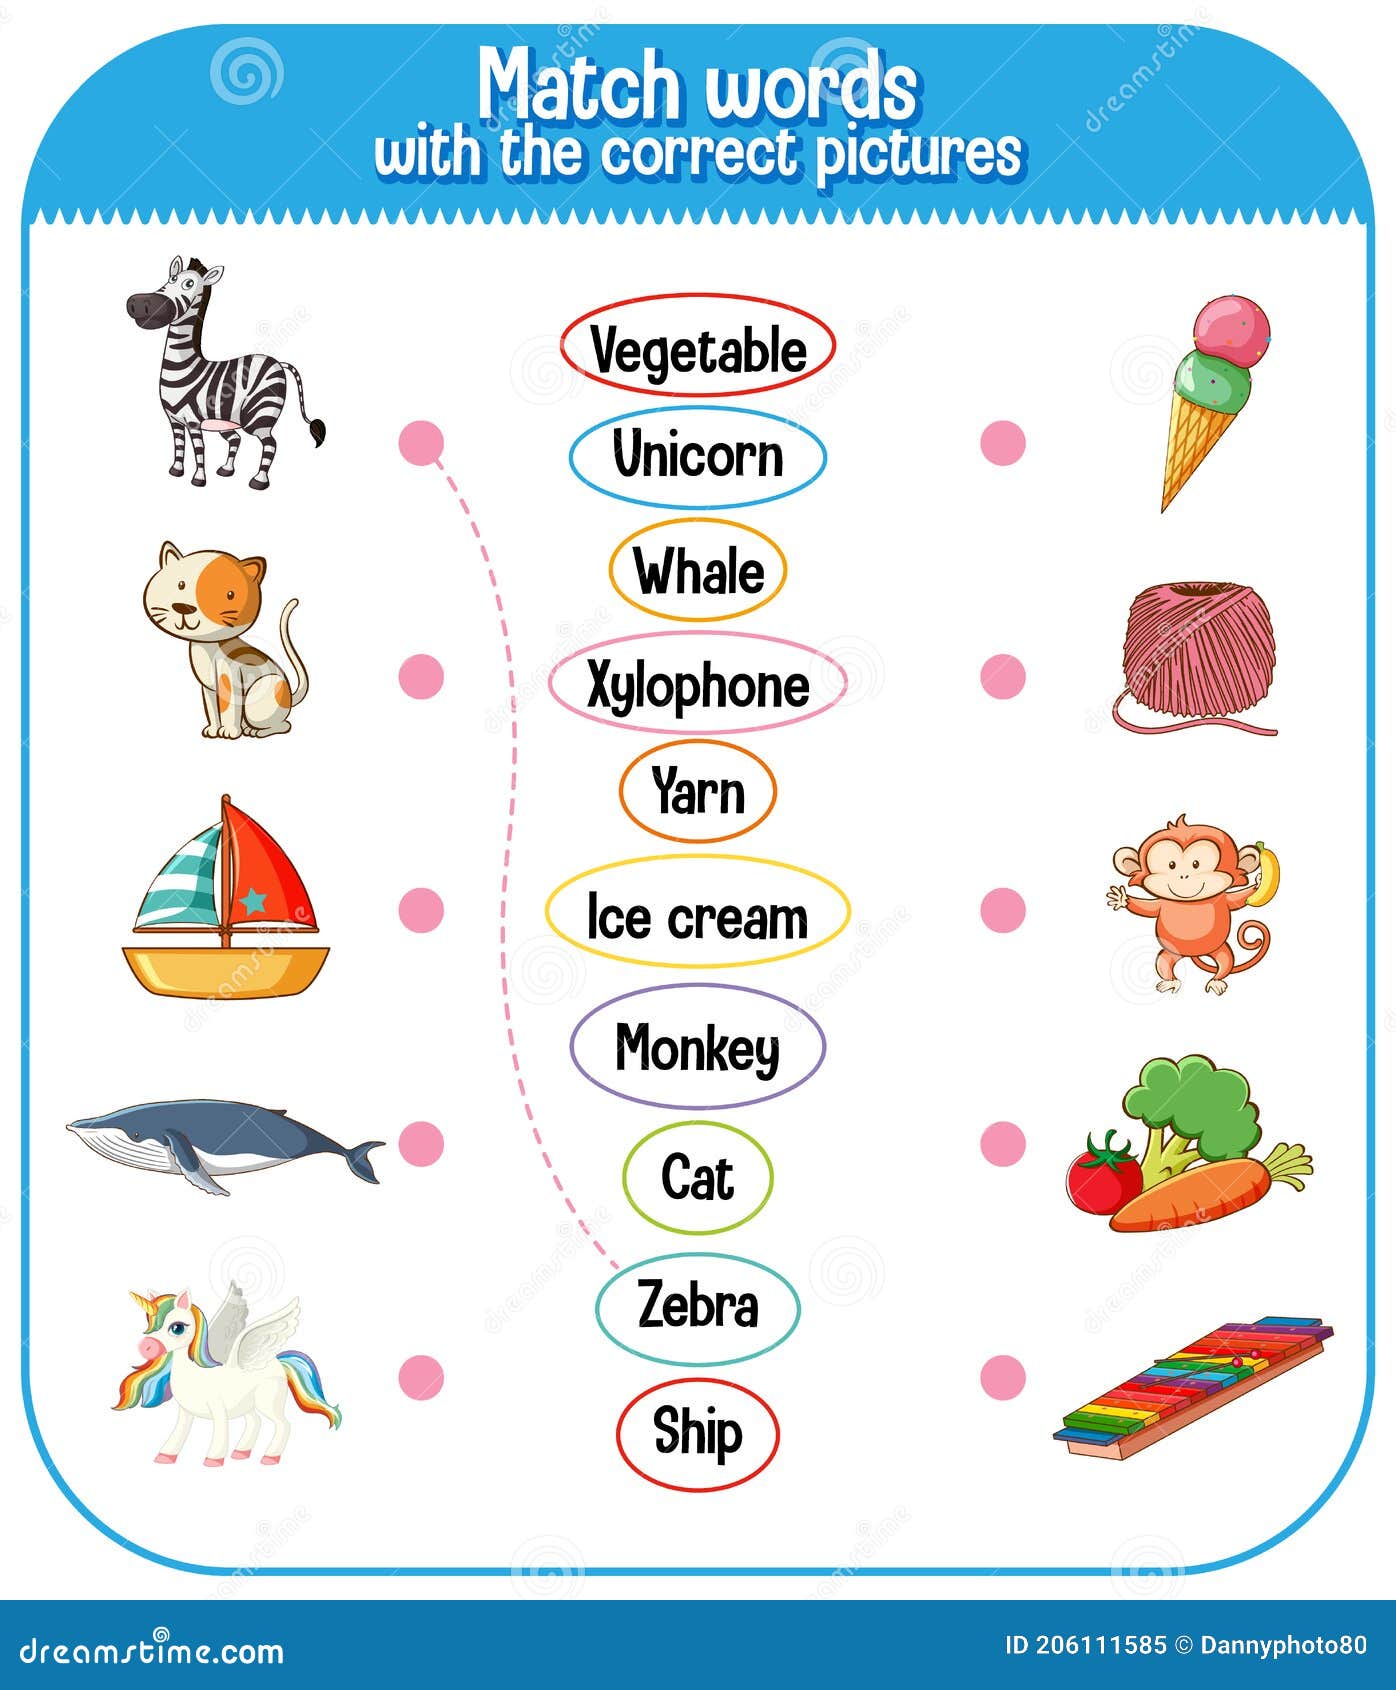 word-to-picture-matching-worksheet-for-children-stock-vector